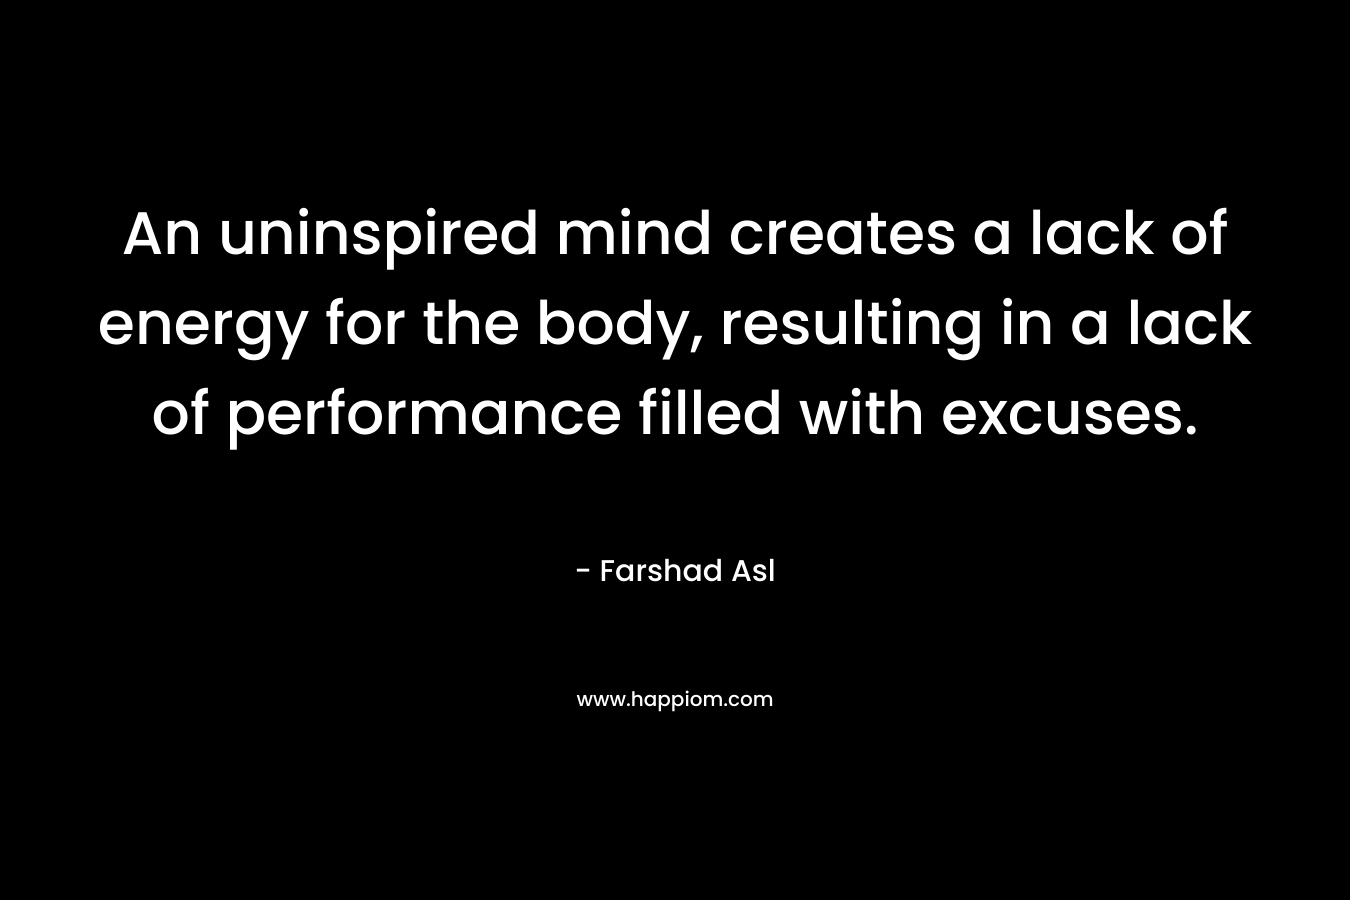 An uninspired mind creates a lack of energy for the body, resulting in a lack of performance filled with excuses.